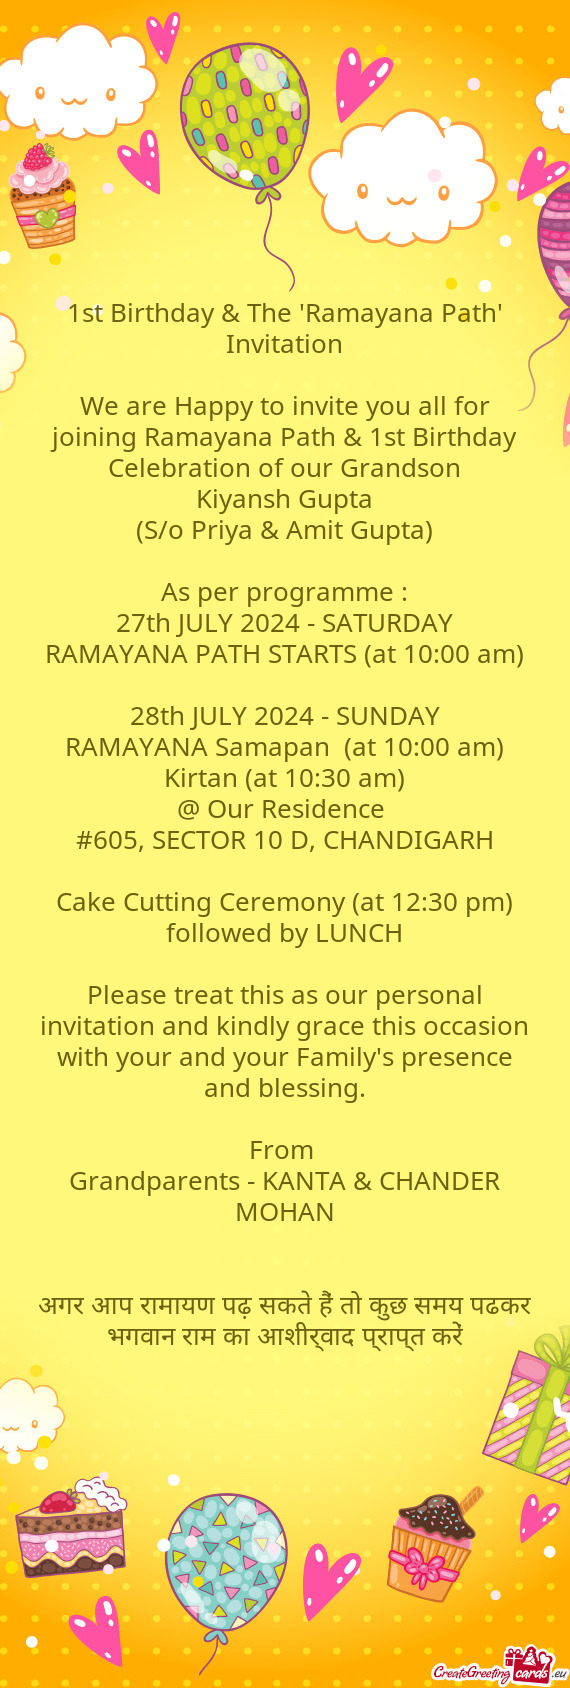 We are Happy to invite you all for joining Ramayana Path & 1st Birthday Celebration of our Grandson